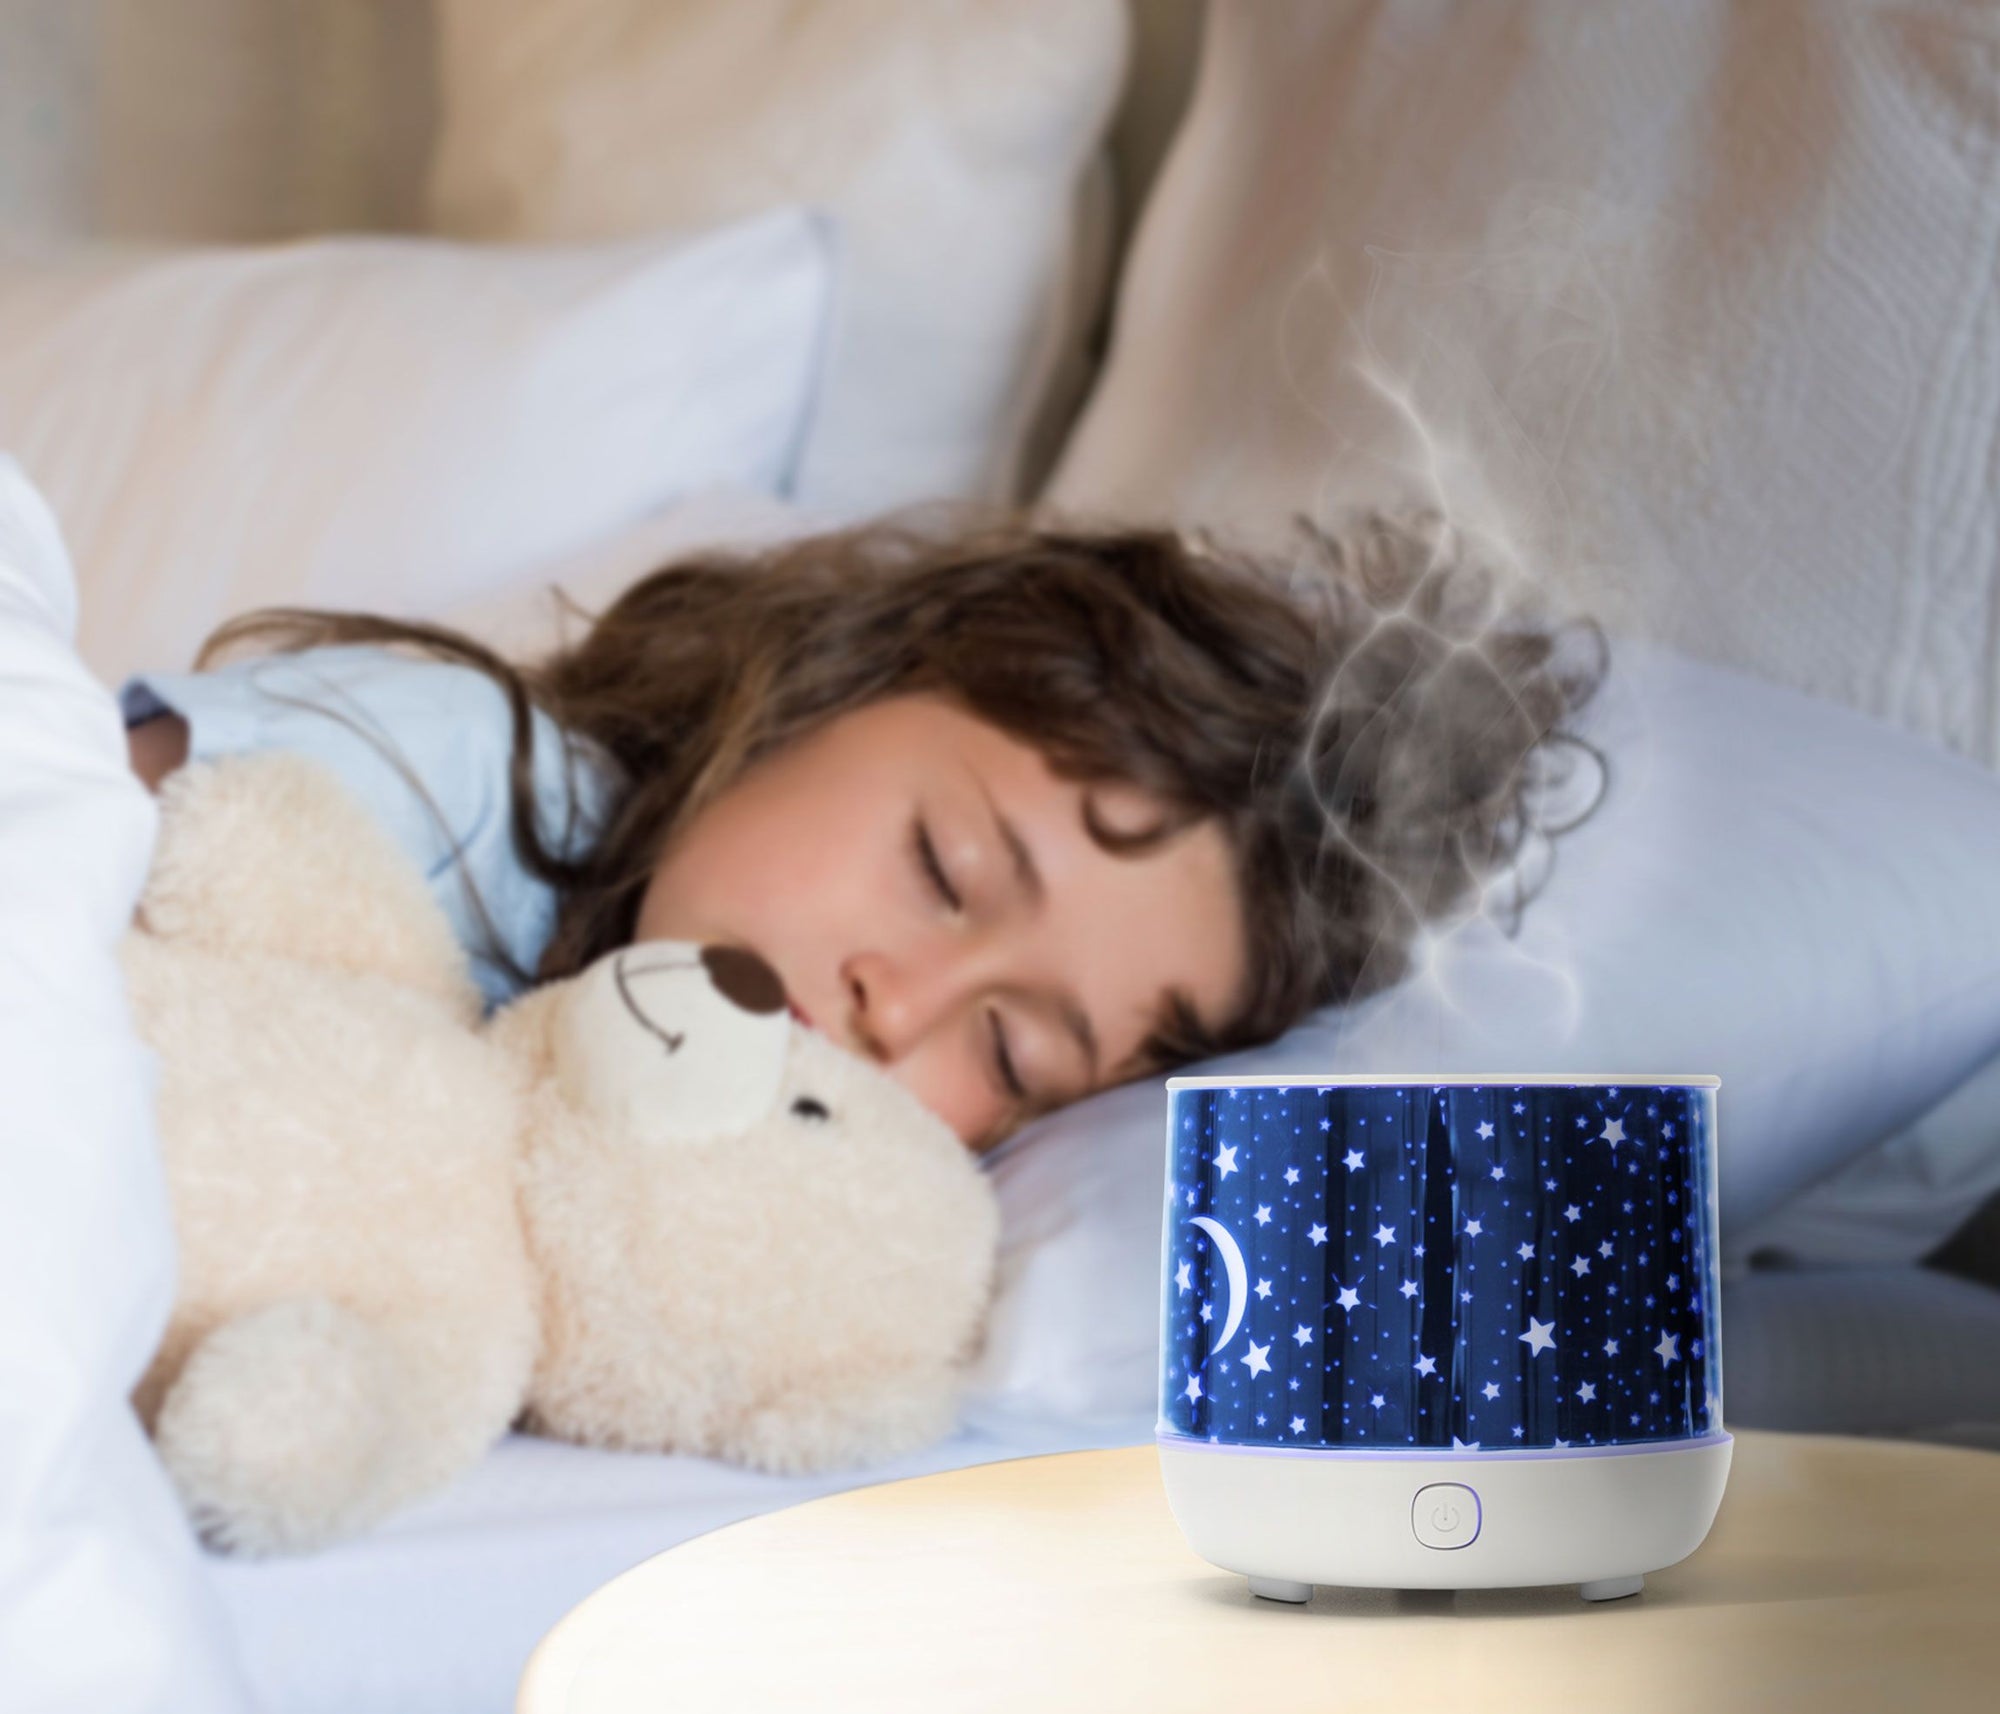 aromatherapy diffuser on bedside table with child sleeping